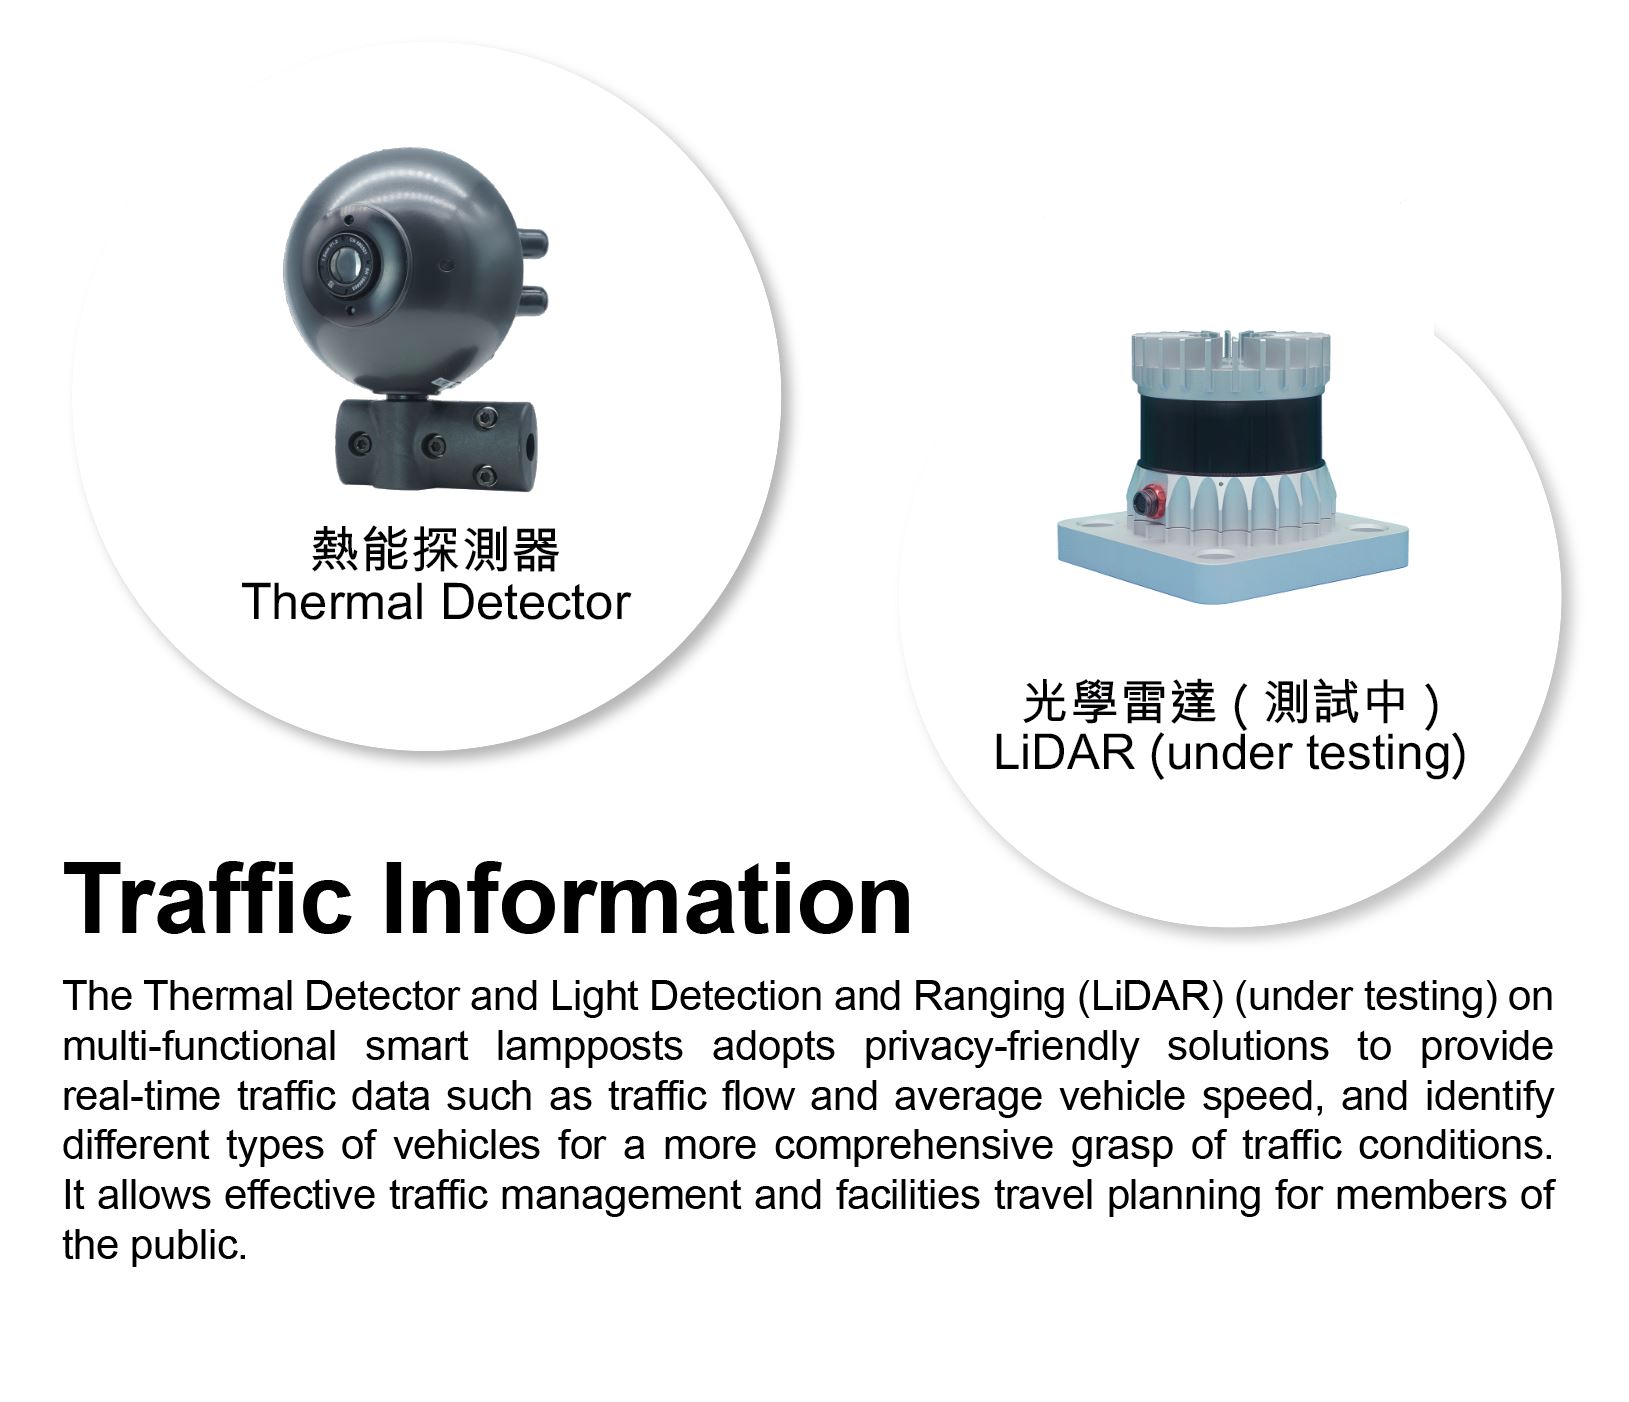 Traffic Information, The Thermal Detector and Light Detection and Ranging (LiDAR) (under testing) on multi-functional smart lampposts adopt privacy-friendly solutions to provide real-time traffic data such as traffic flow and average vehicle speed, and identify different types of vehicles for a more comprehensive grasp of traffic conditions.  It allows effective traffic management and facilities travel planning for members of the public.